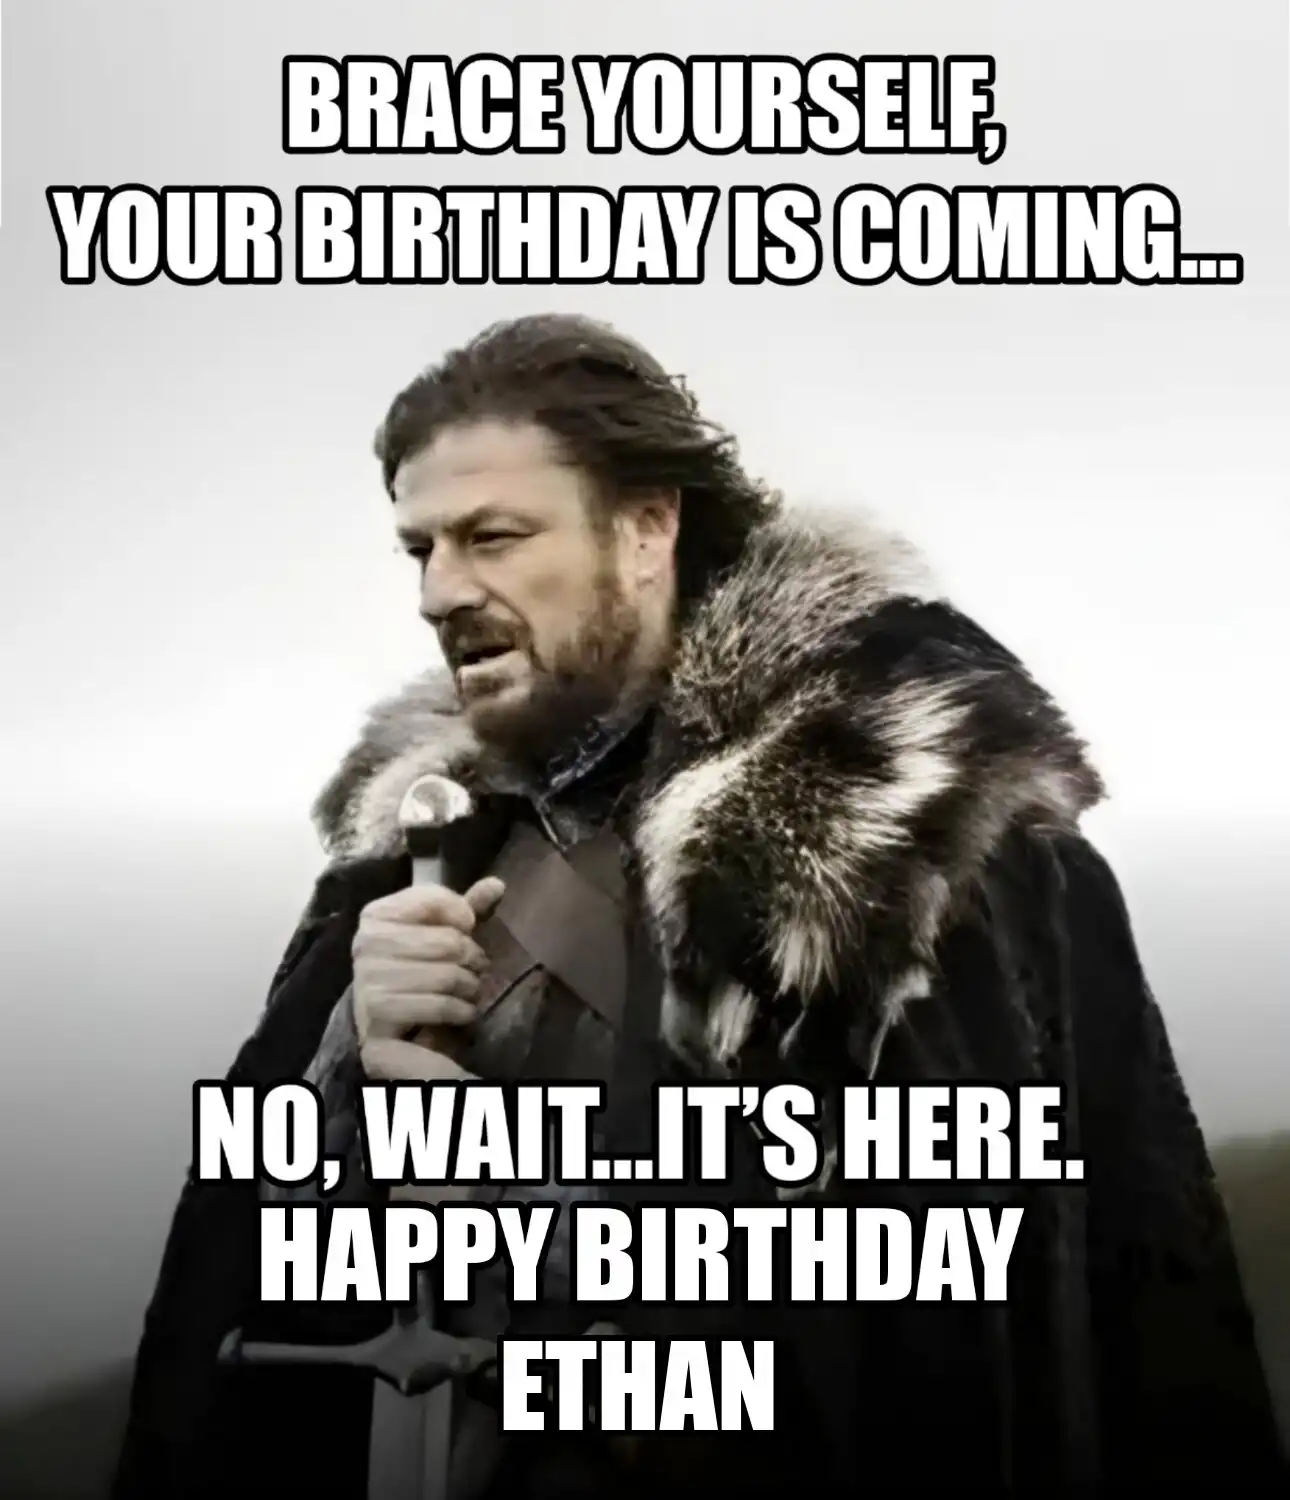 Happy Birthday Ethan Brace Yourself Your Birthday Is Coming Meme